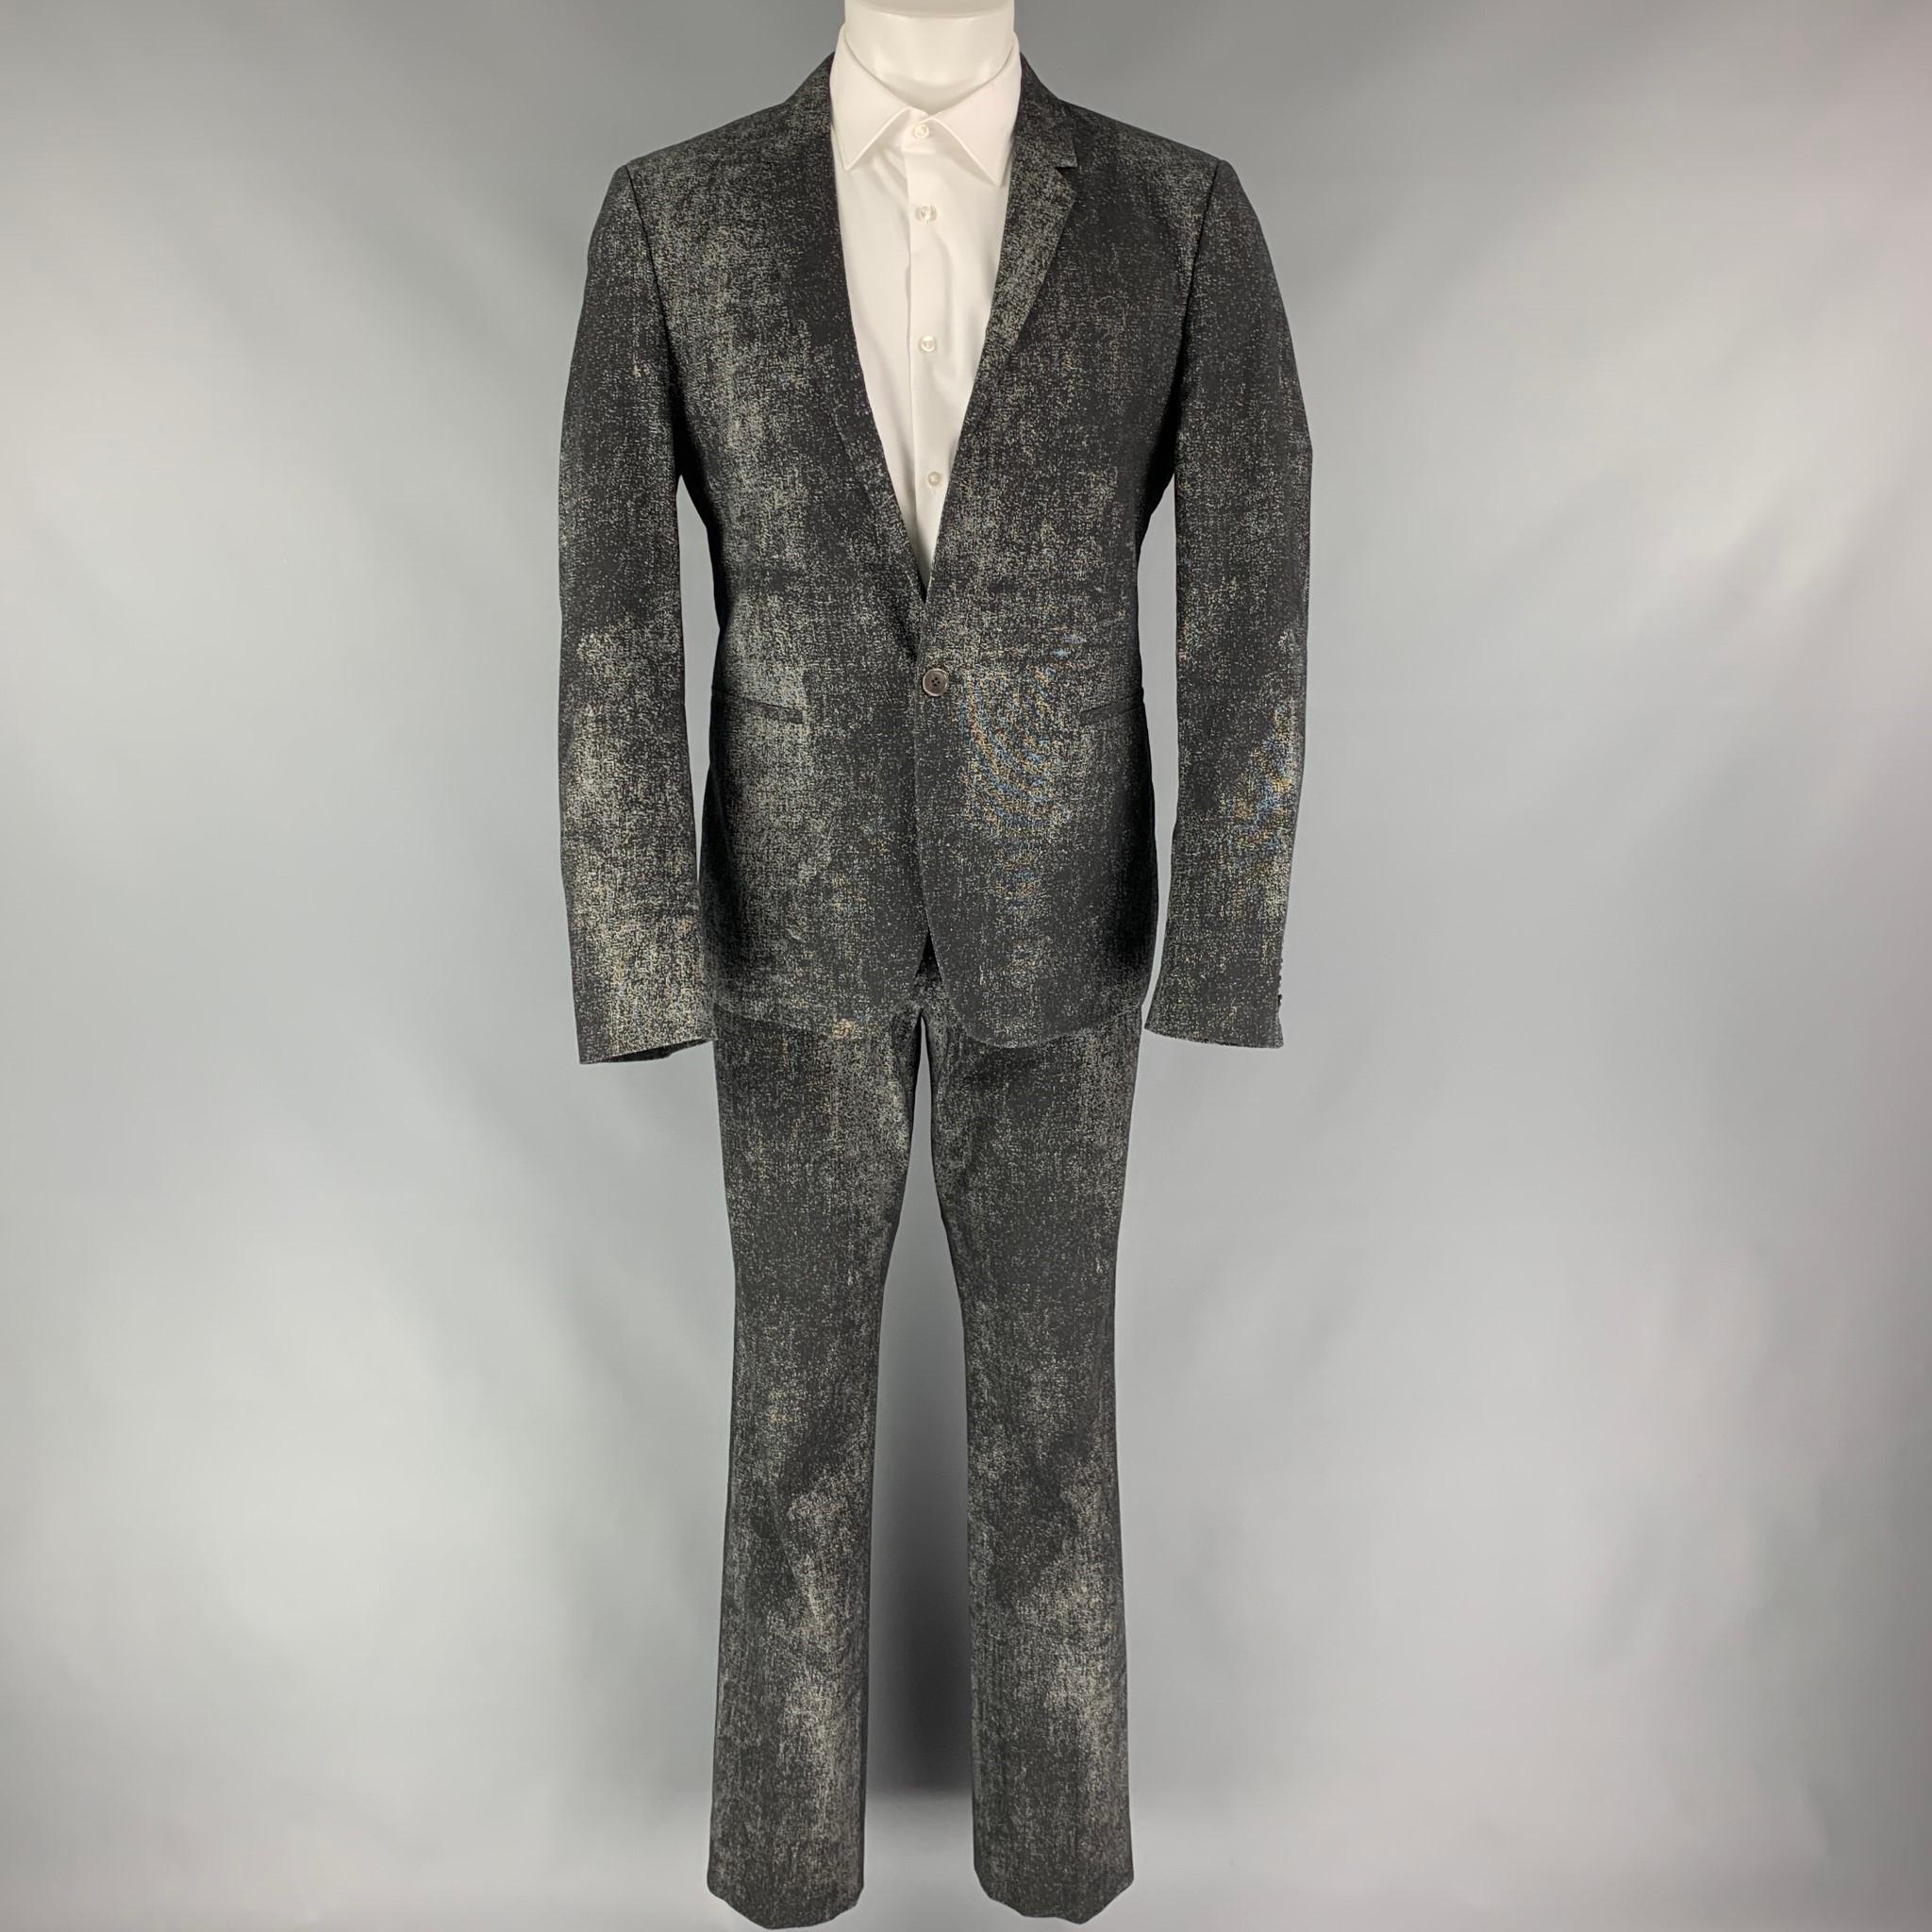 CALVIN KLEIN COLLECTION suit comes in a black & grey splattered cotton blend with a full liner and includes a single breasted, single button sport coat with a notch lapel and matching flat front trousers.

Very Good Pre-Owned Condition.
Marked: